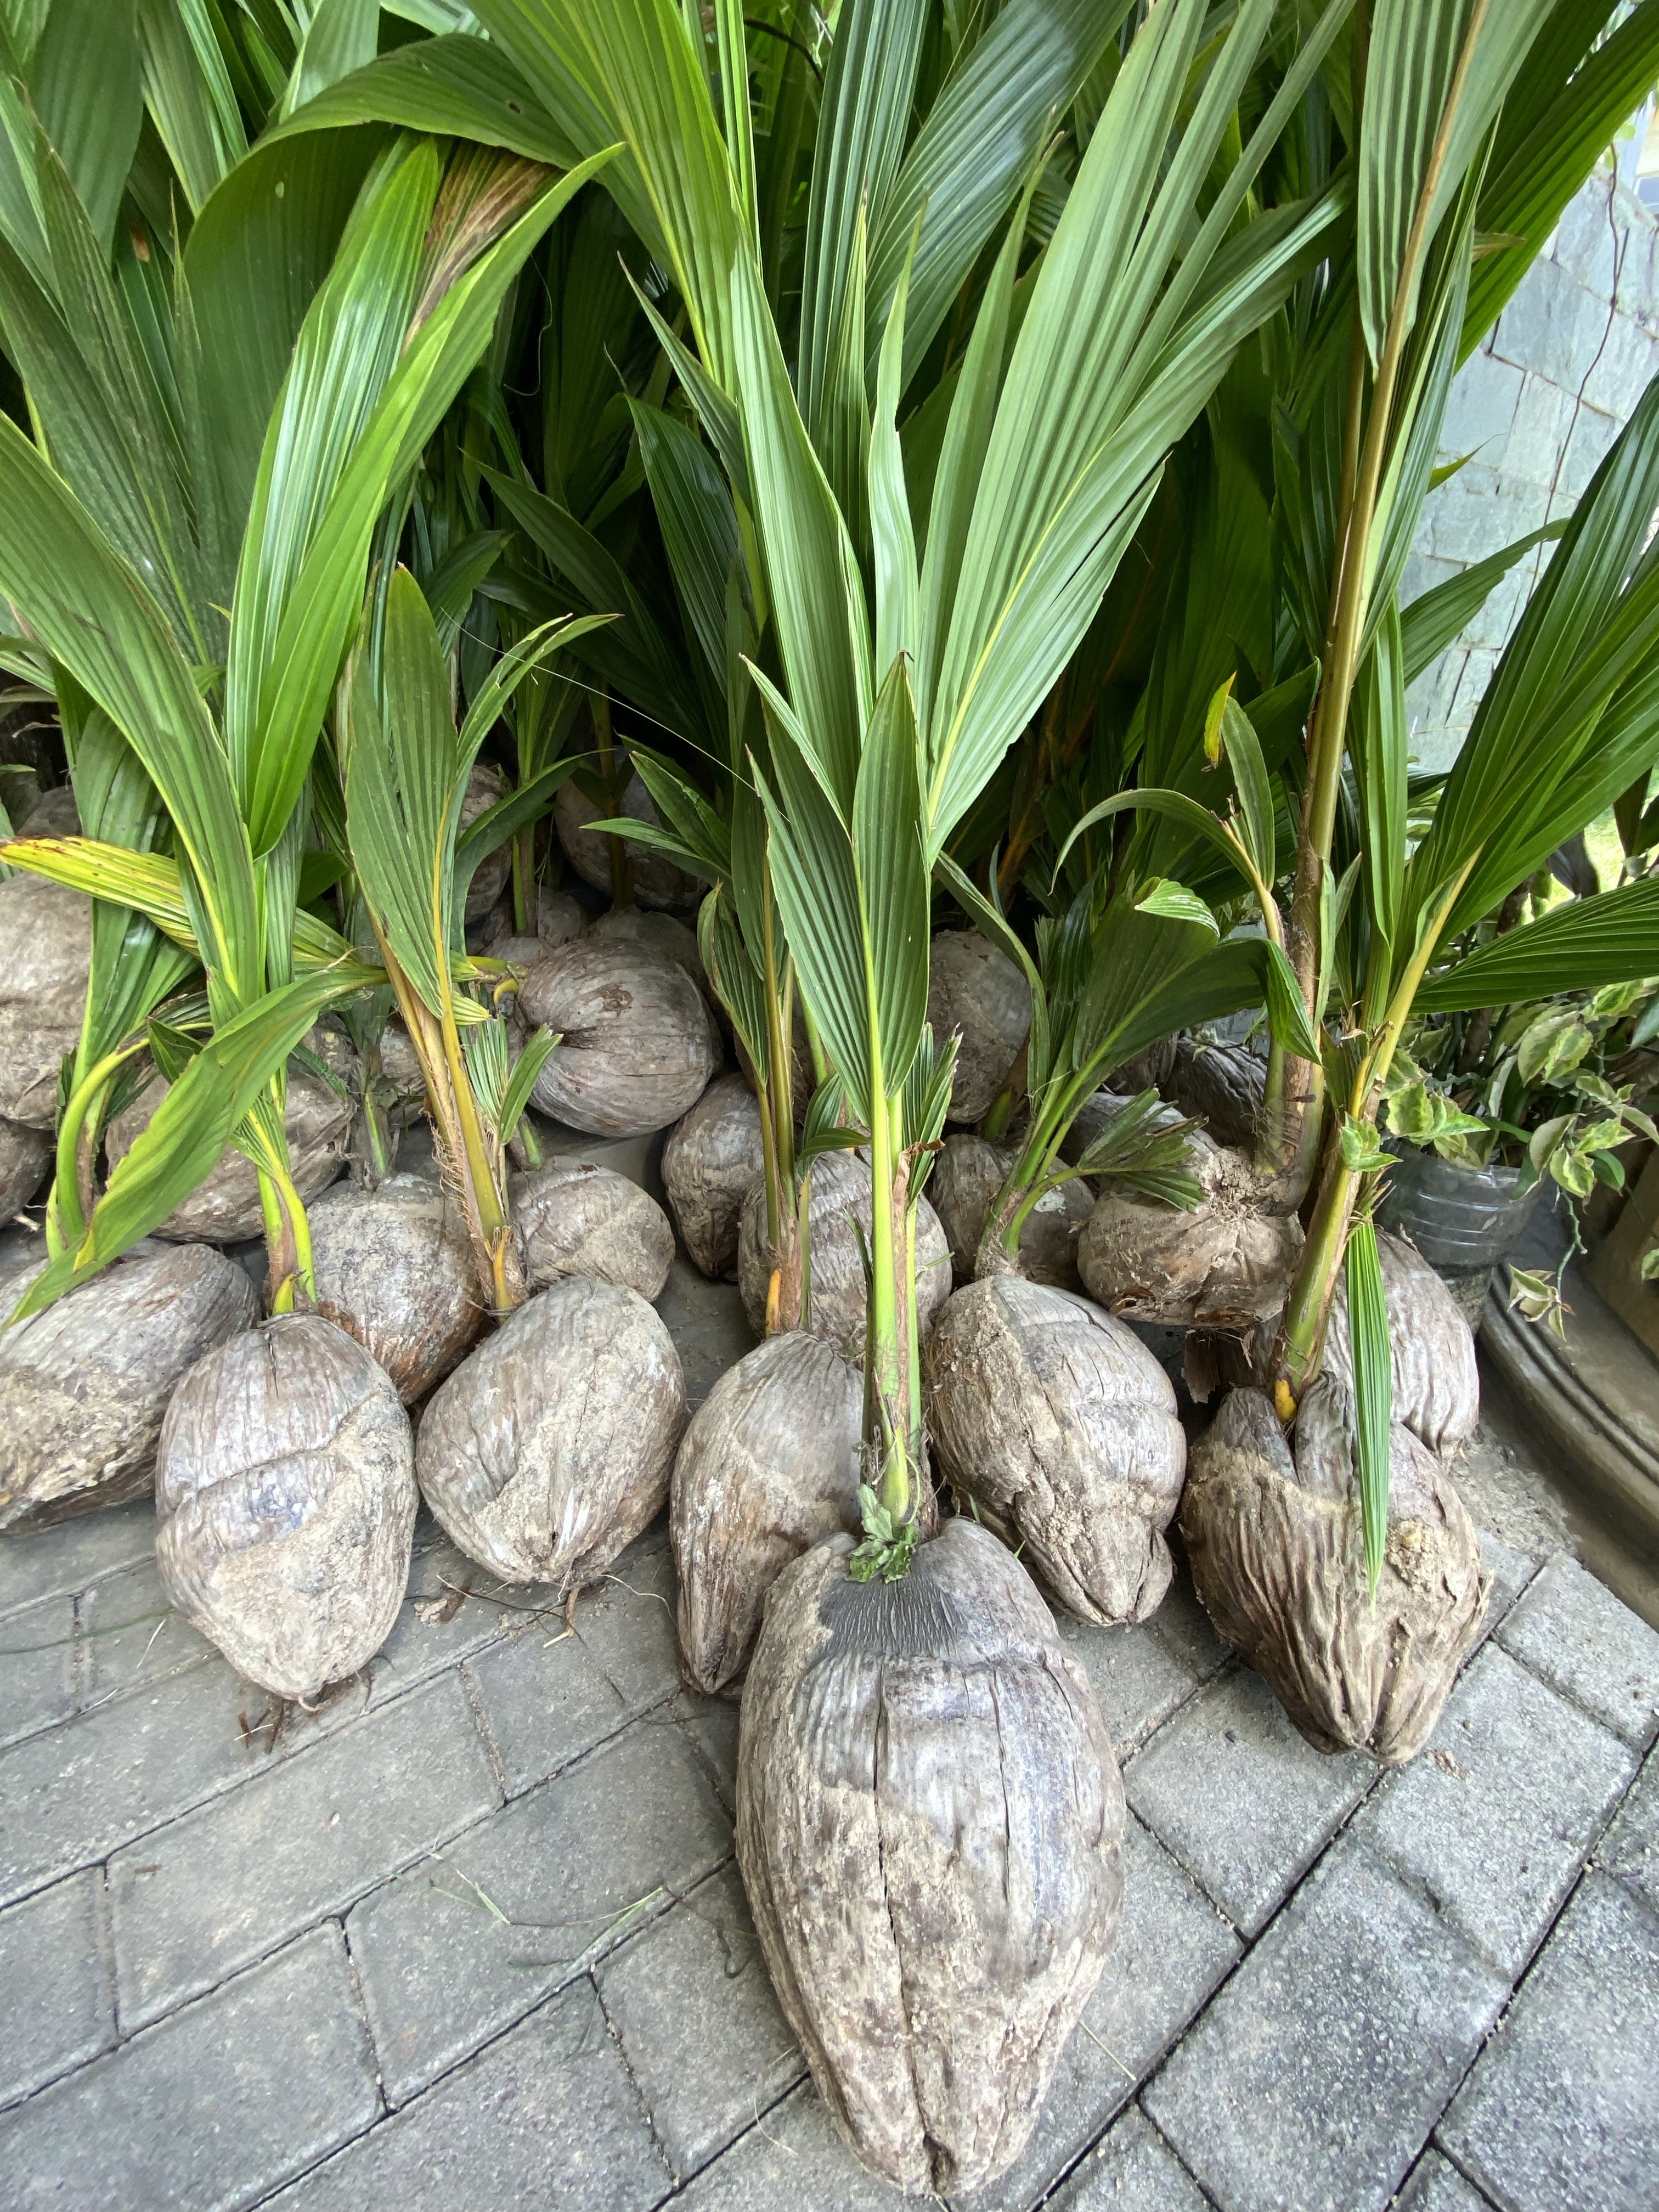 PCA rolls-out plan for P75B coco levy fund utilization